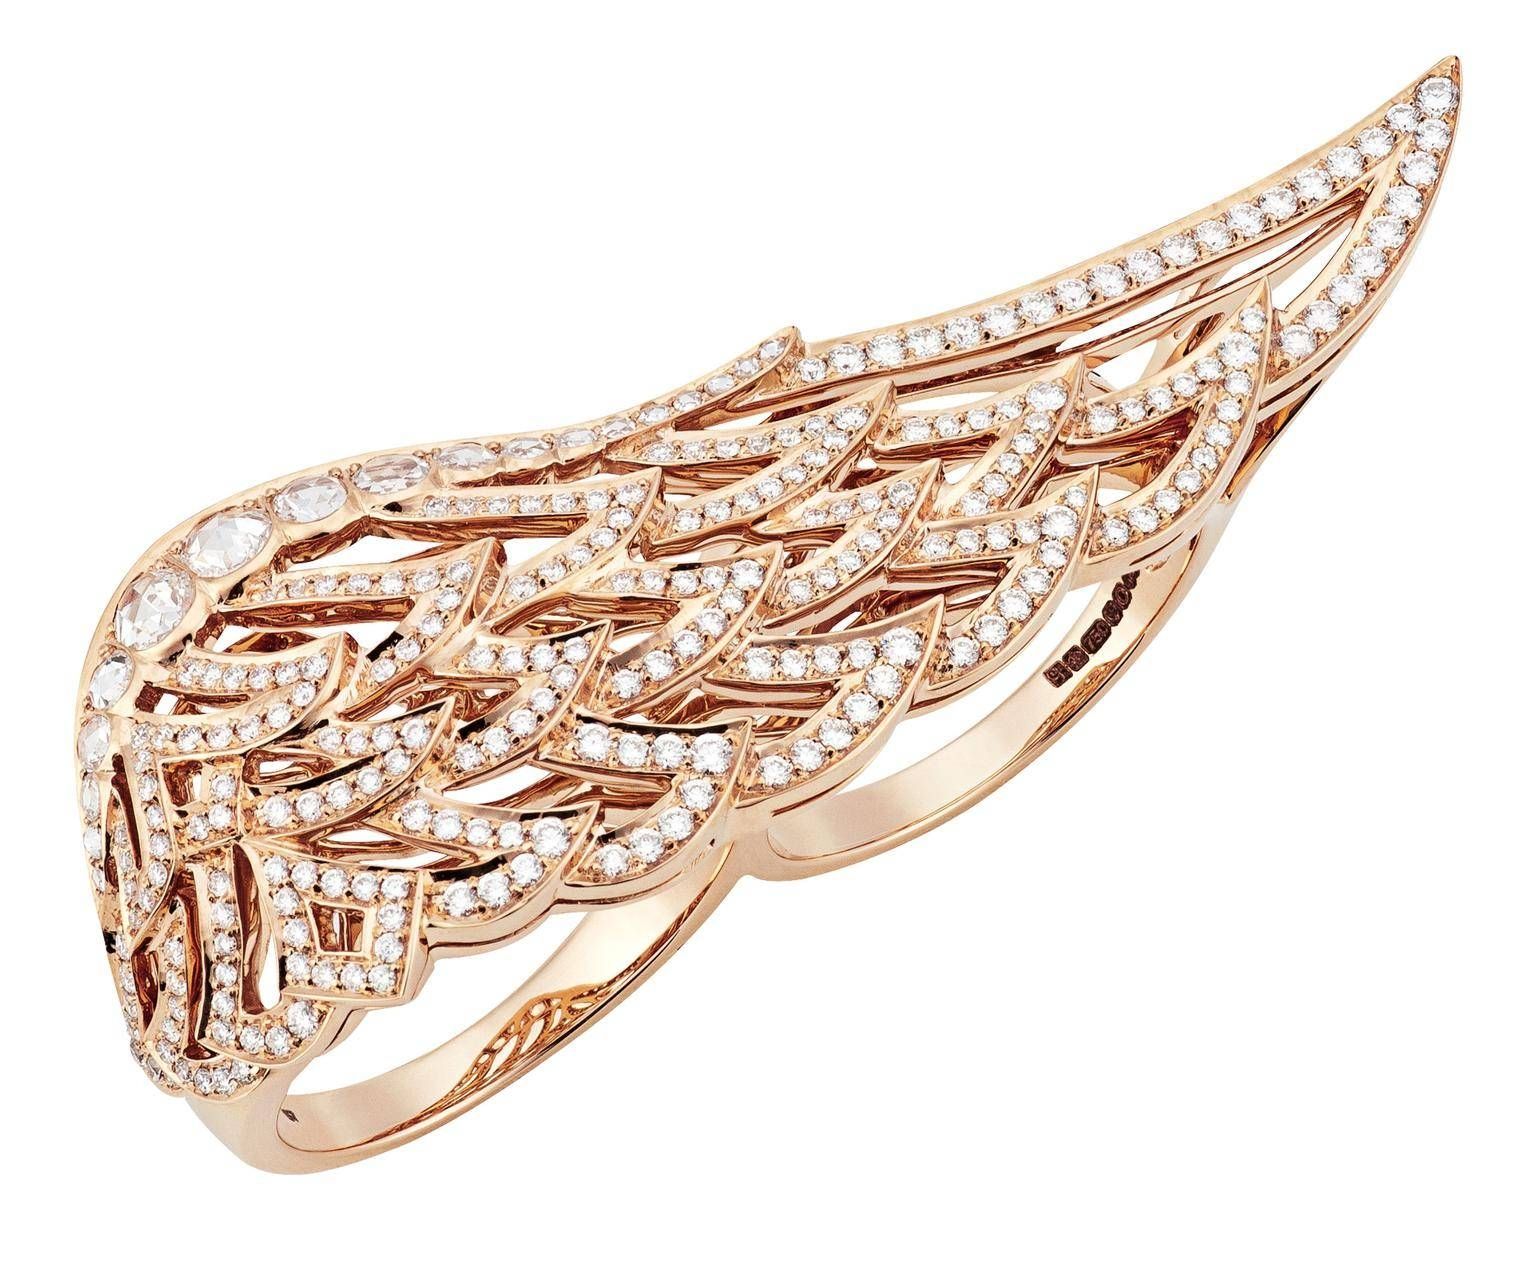 Garrard Wings 10th Anniversary Ring In Rose Gold And White Regarding Recent Rose Gold Anniversary Rings (View 8 of 25)